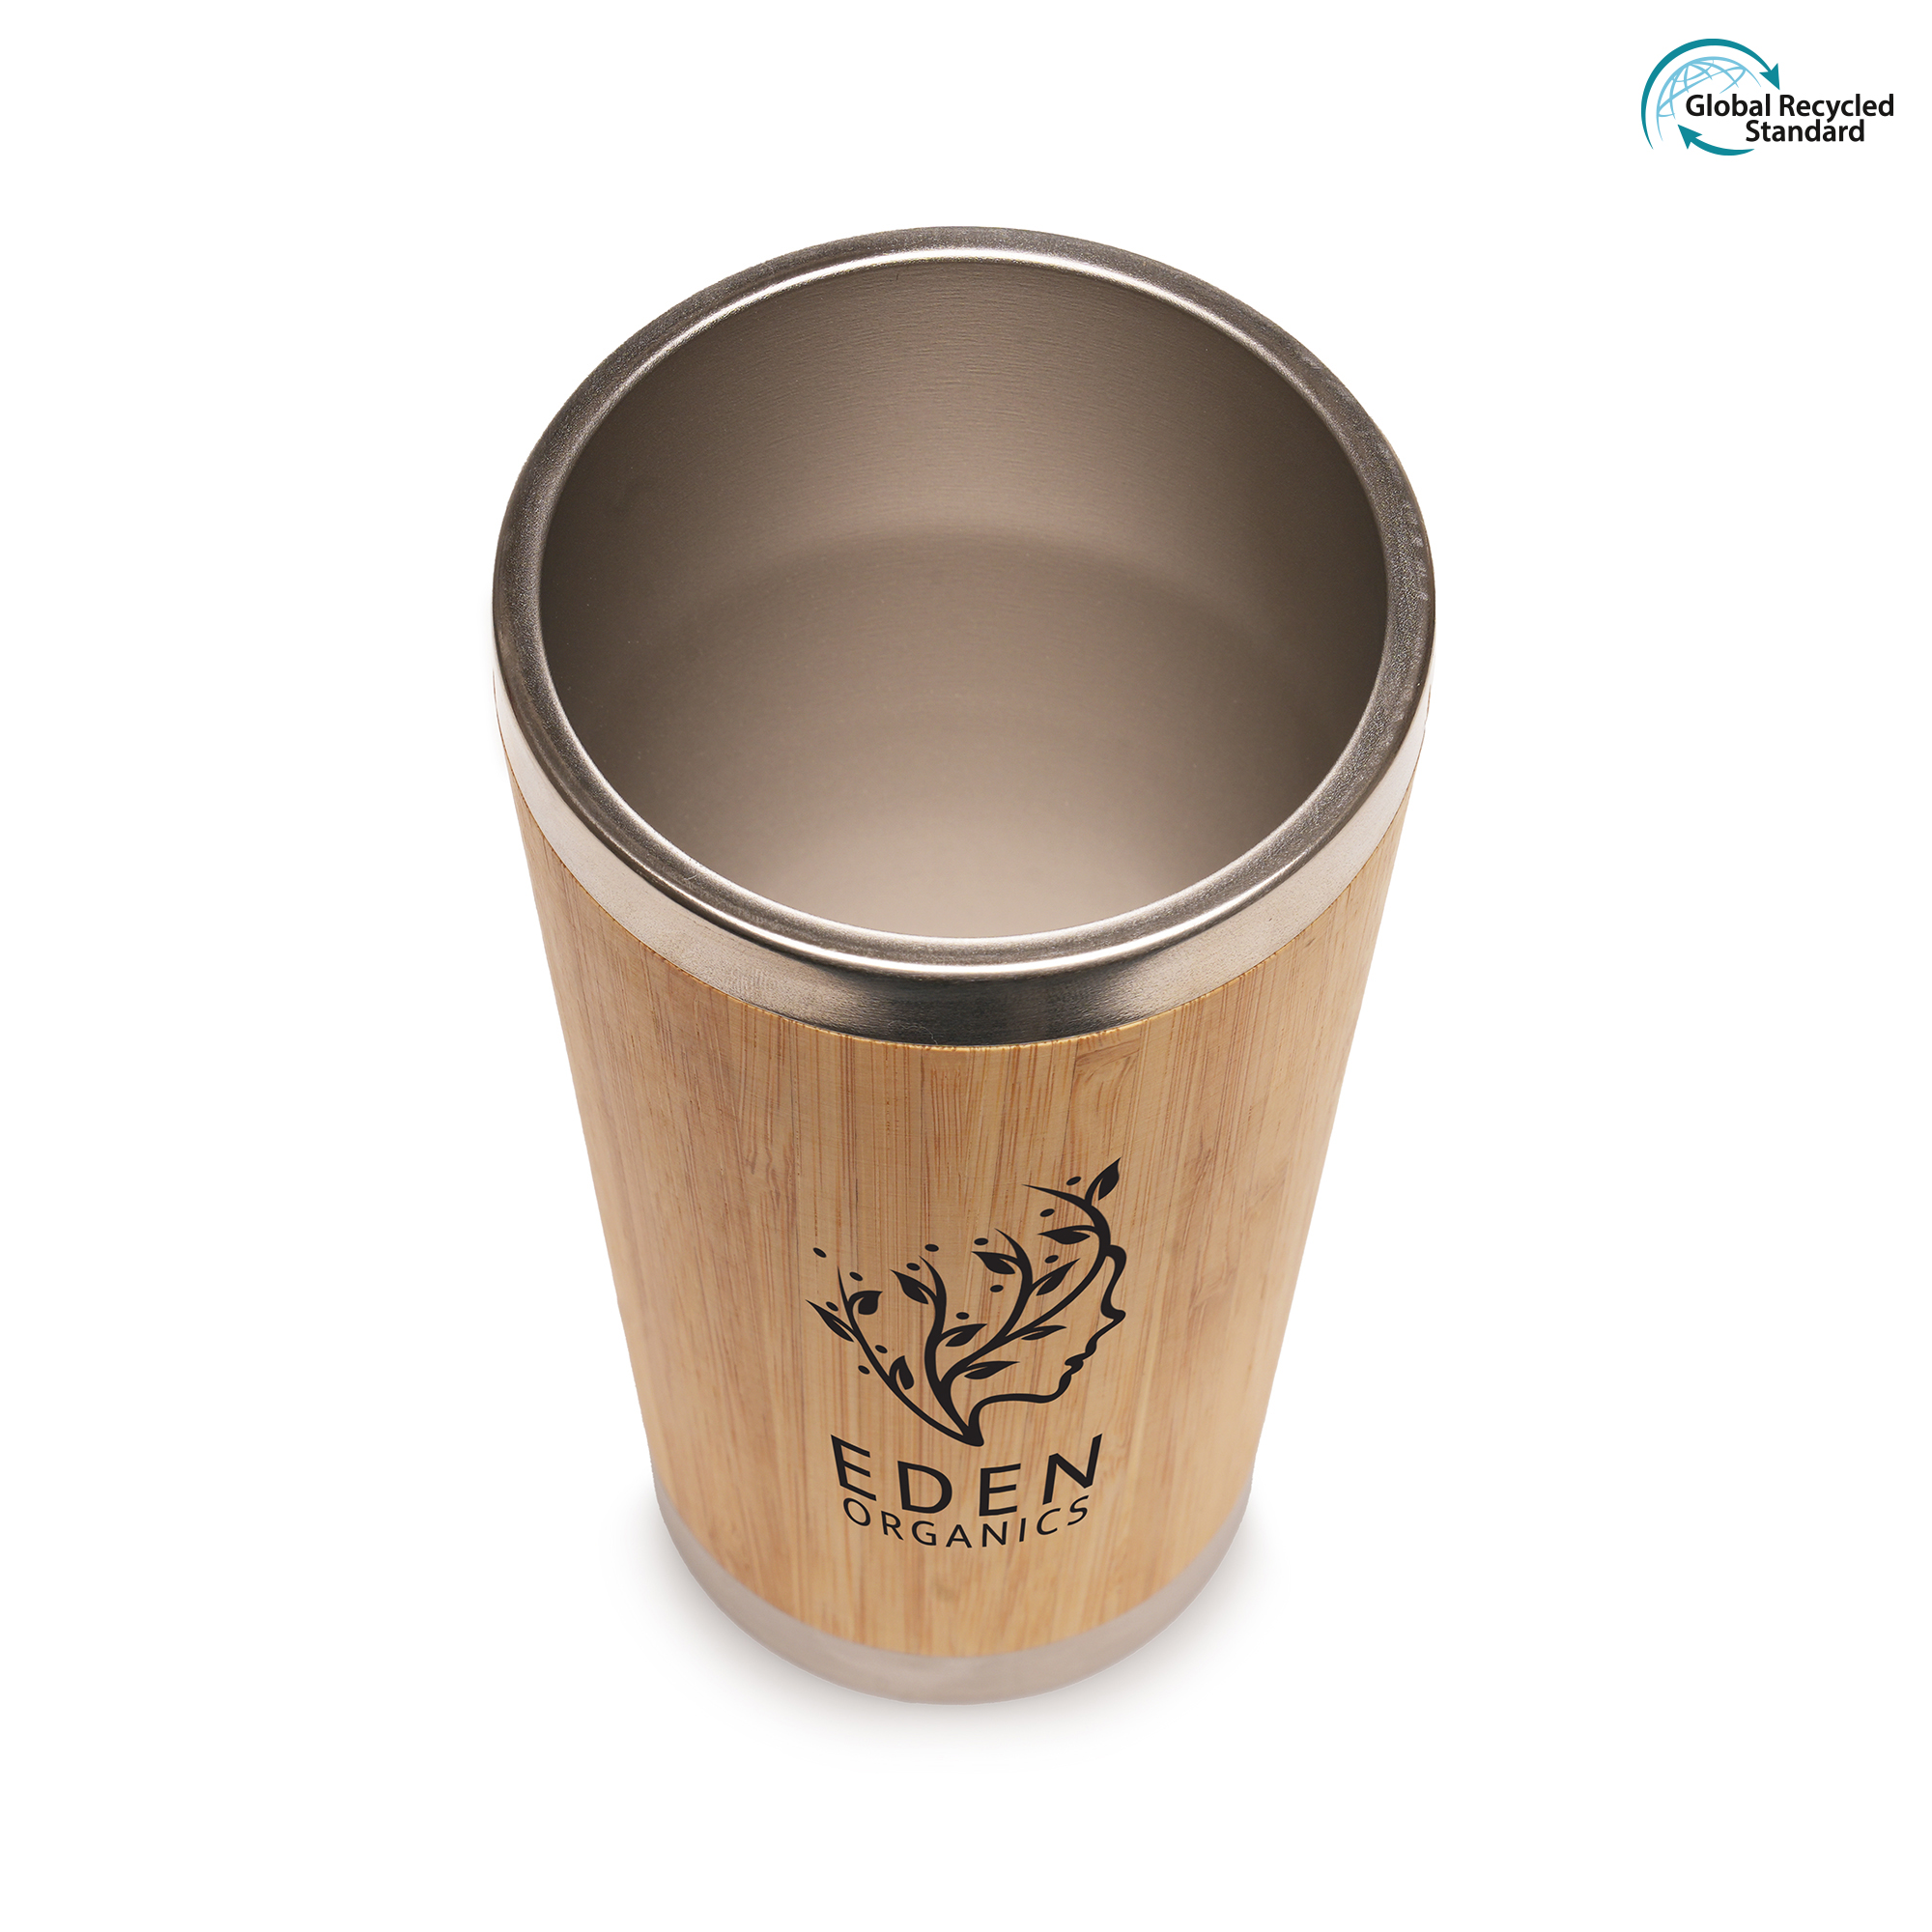 450ml double walled, stainless steel and bamboo travel tumbler with non-slip base, recycled plastic lid liner and RABS sliding sipper. A great promotional product to give a sustainable look and feel to the product. BPA & PVC free